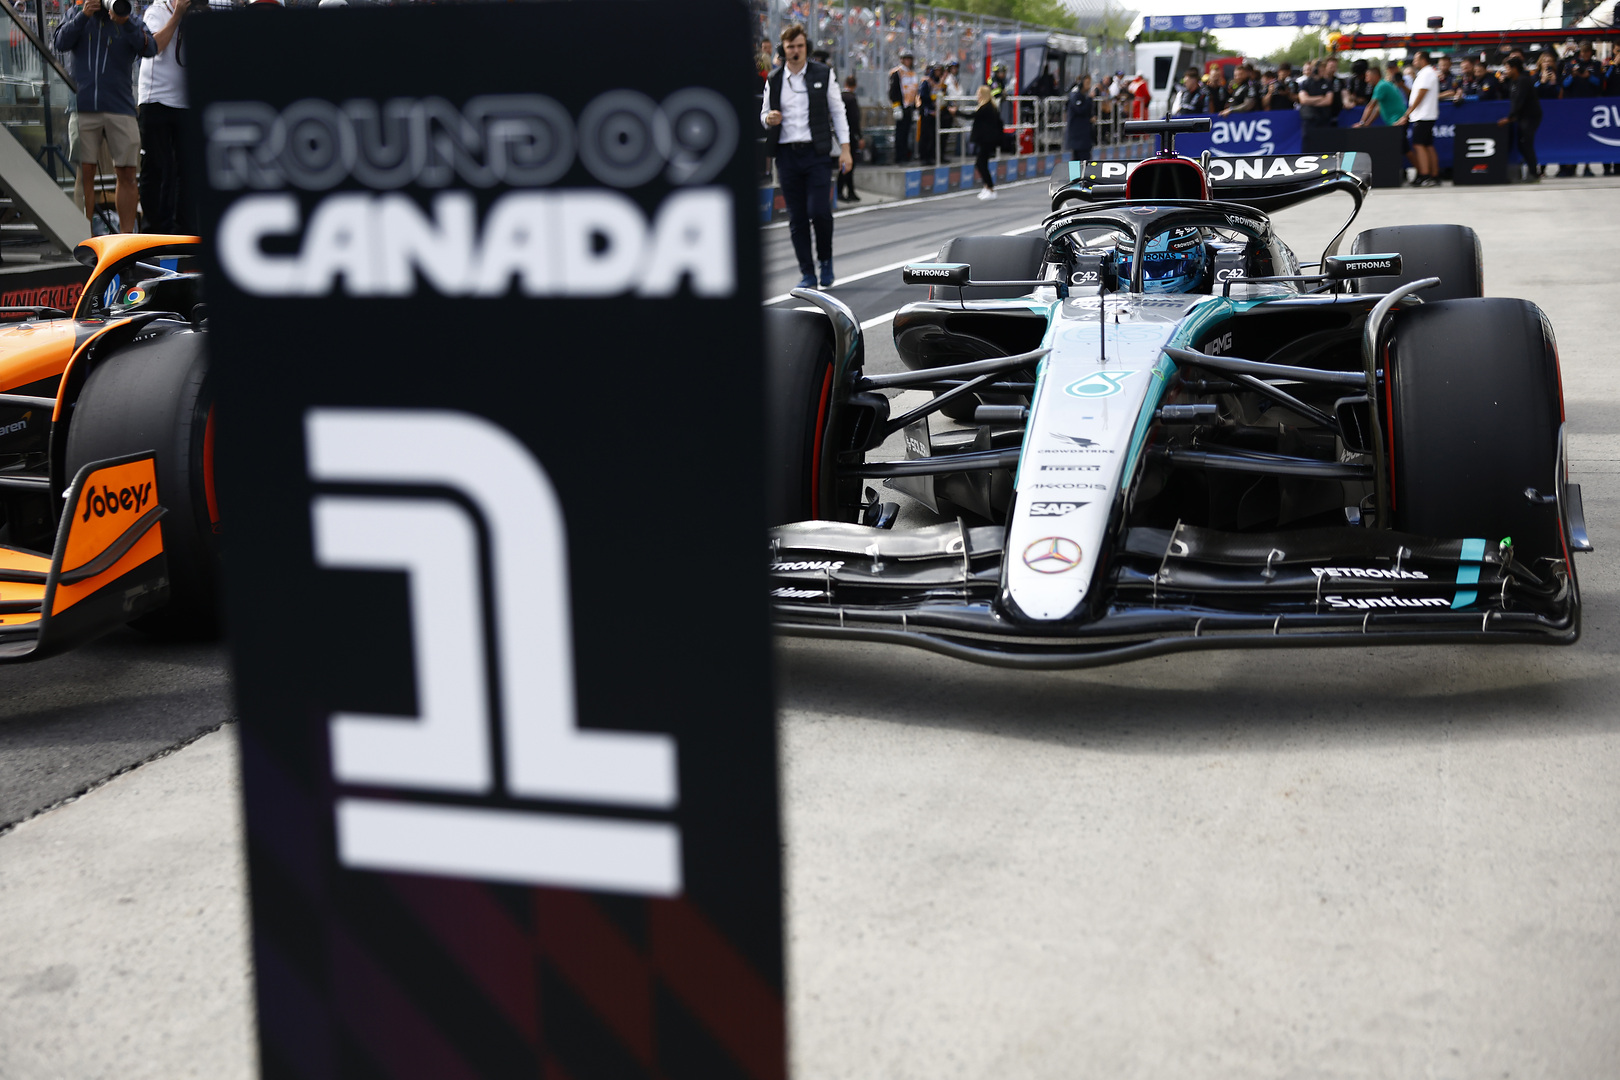 Canadian Grand Prix, Saturday - George Russell